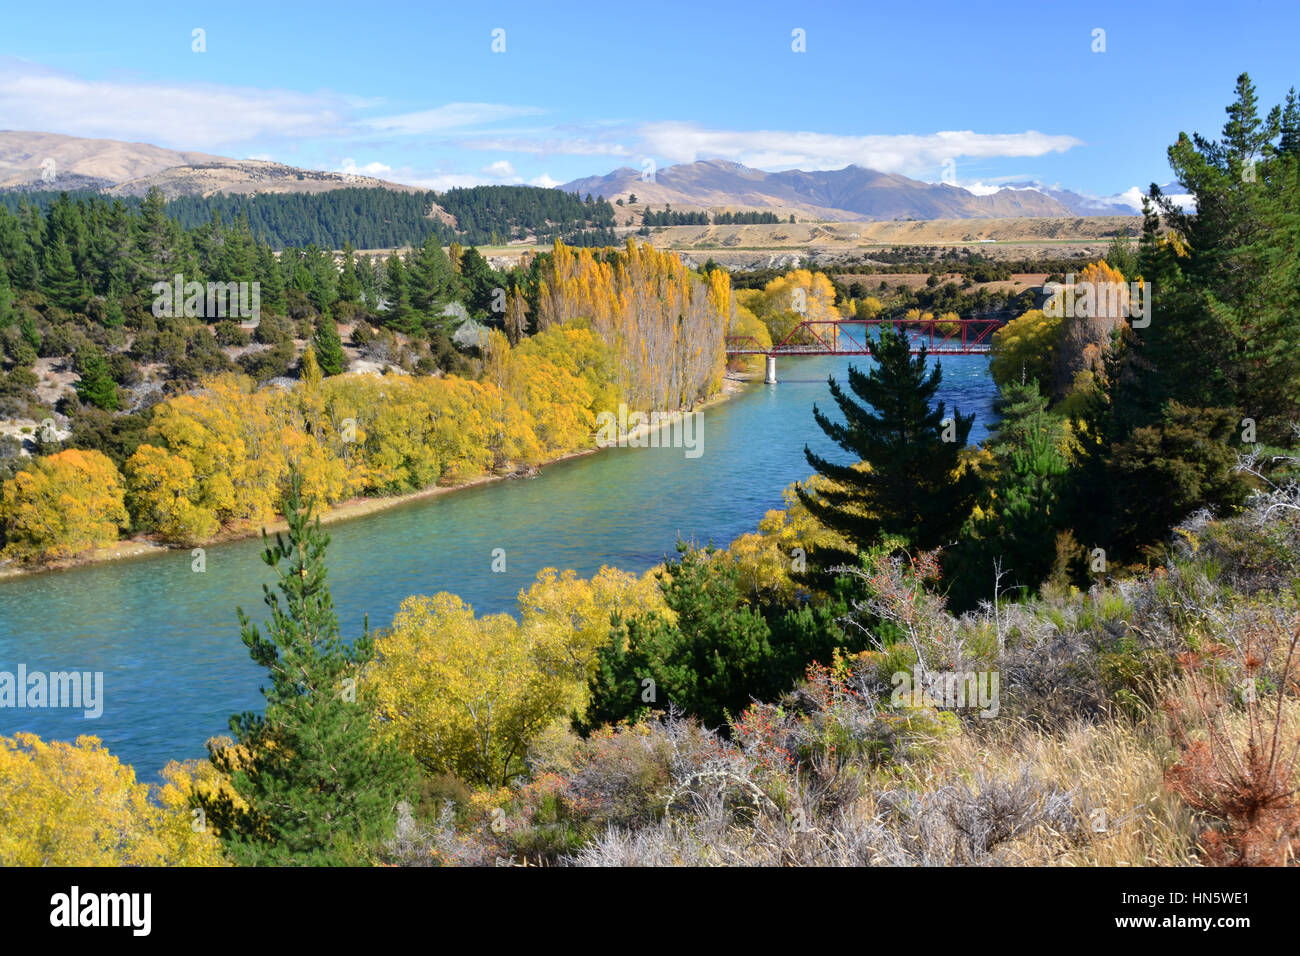 An aerial view of the Clutha River and Bridge in Autumn. One of New Zealand's longest and most beautiful rivers and popular for trout fishing. Stock Photo